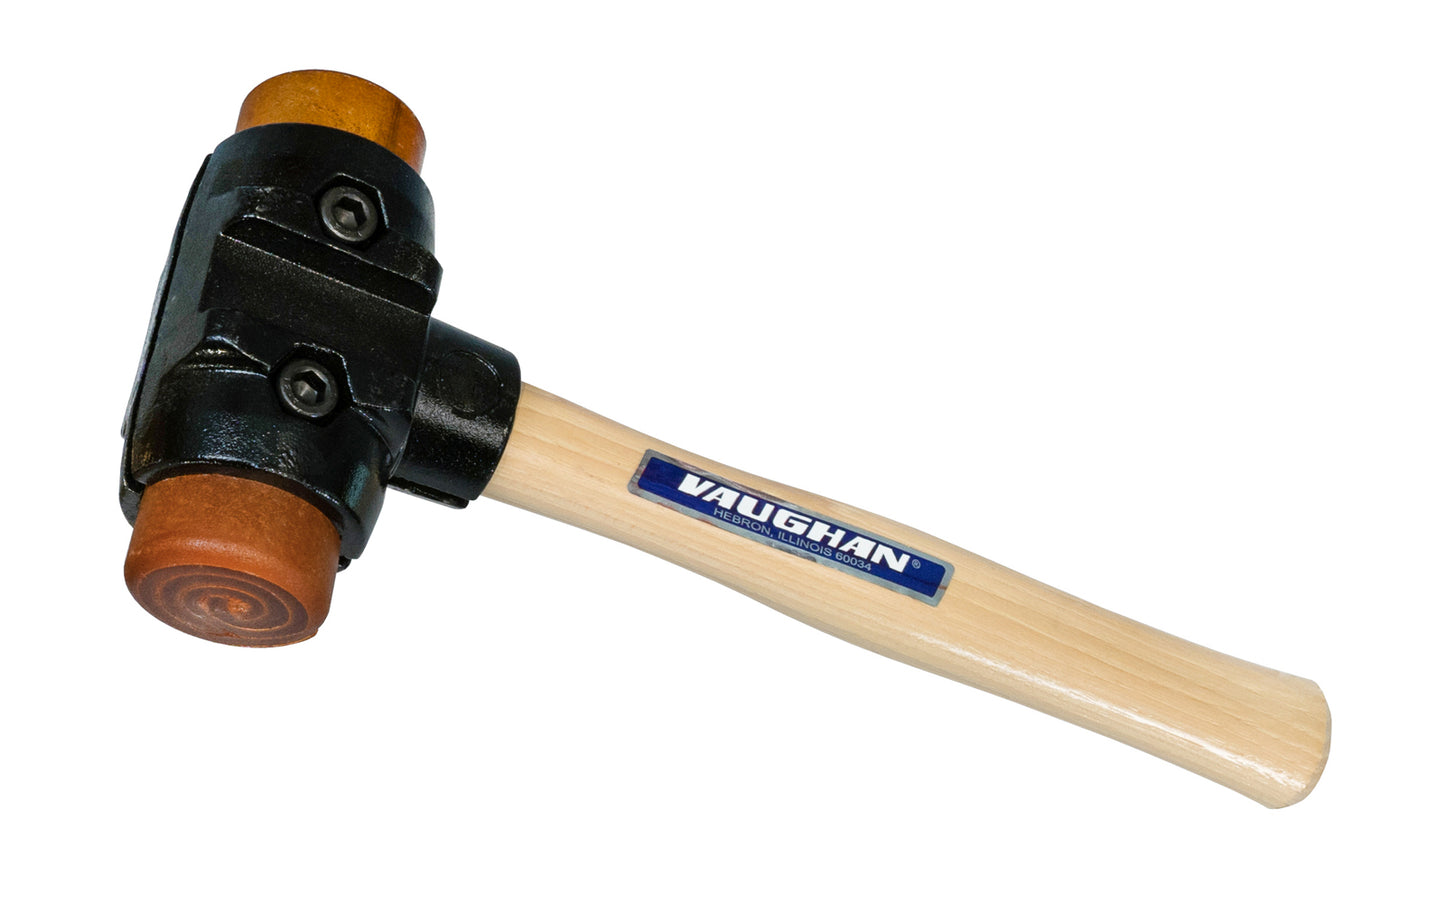 Vaughan Split-Head Hammer with Rawhide Faces - 4 lb. ~ No. SH200 - Made in England - This Split-Head Hammer allows for quick change of faces & handles. Malleable iron heads are designed for uniform clamping pressure on handle & faces. Extension collars transfer shock to more handle surface, reducing user fatigue & handle breakage. Top quality hardwood handle.  Rawhide faces - 1-7/8" face diameter